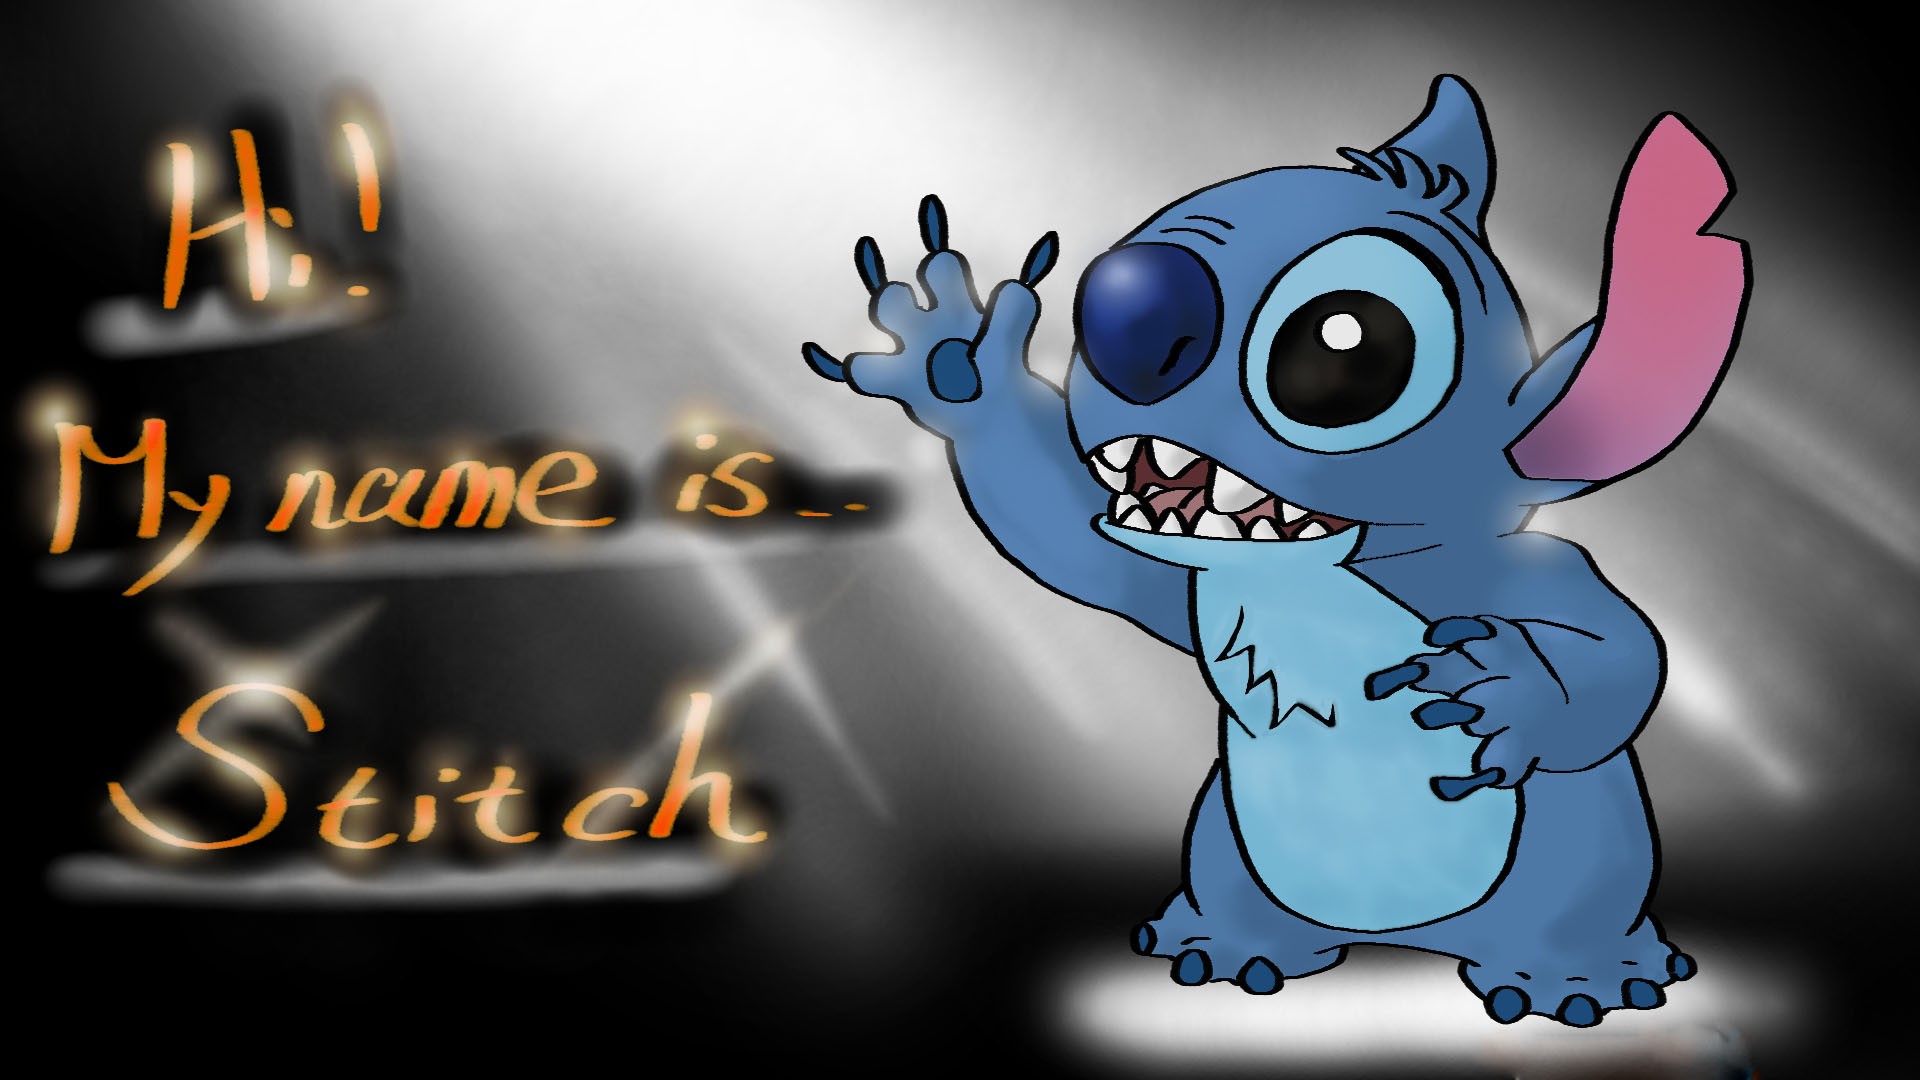  Stitch  wallpaper    Download free cool wallpapers  for 